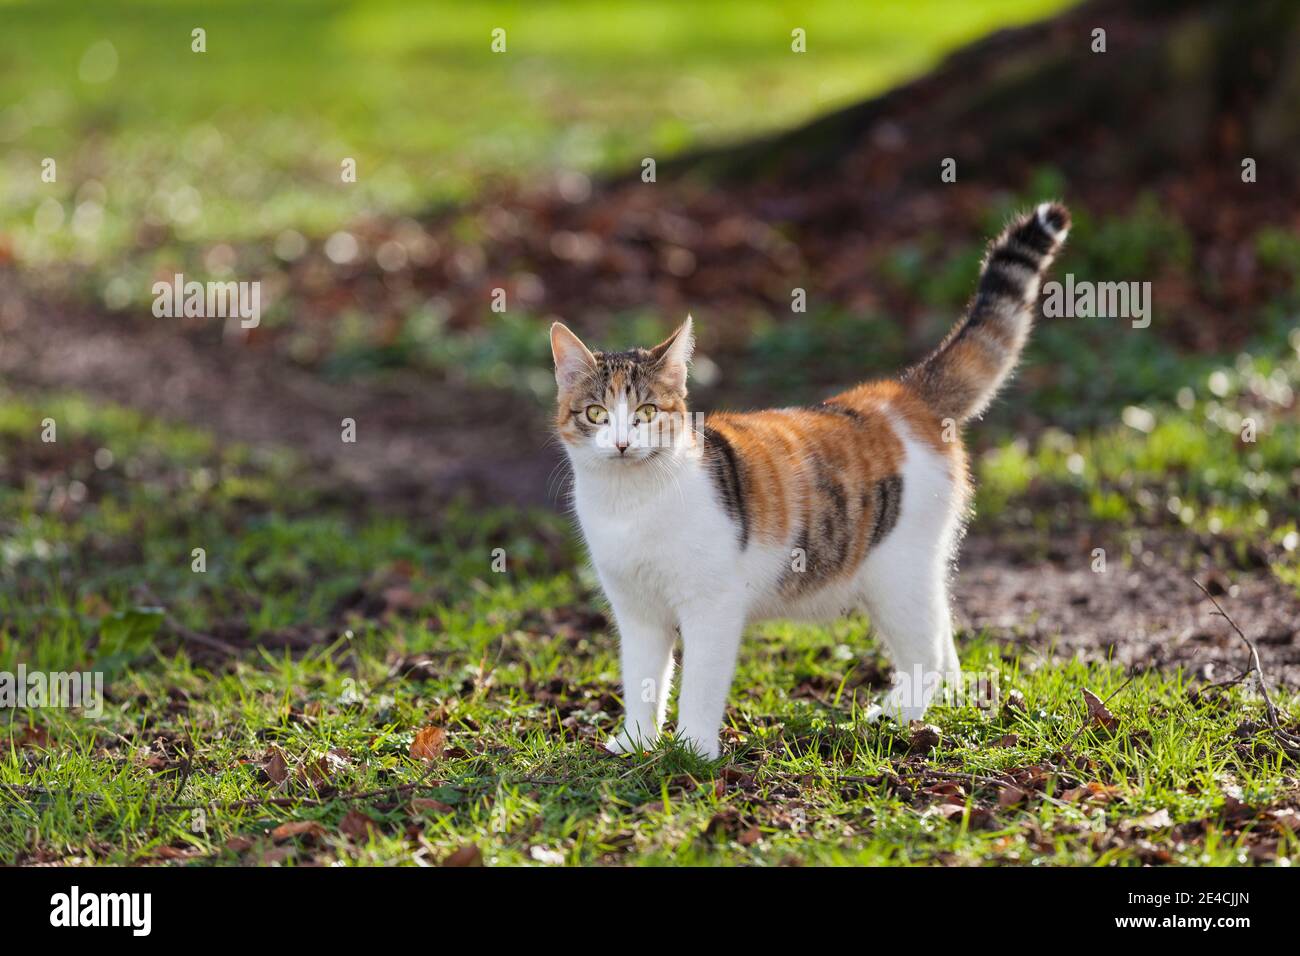 The little colorful cat out and about in the garden. Stock Photo